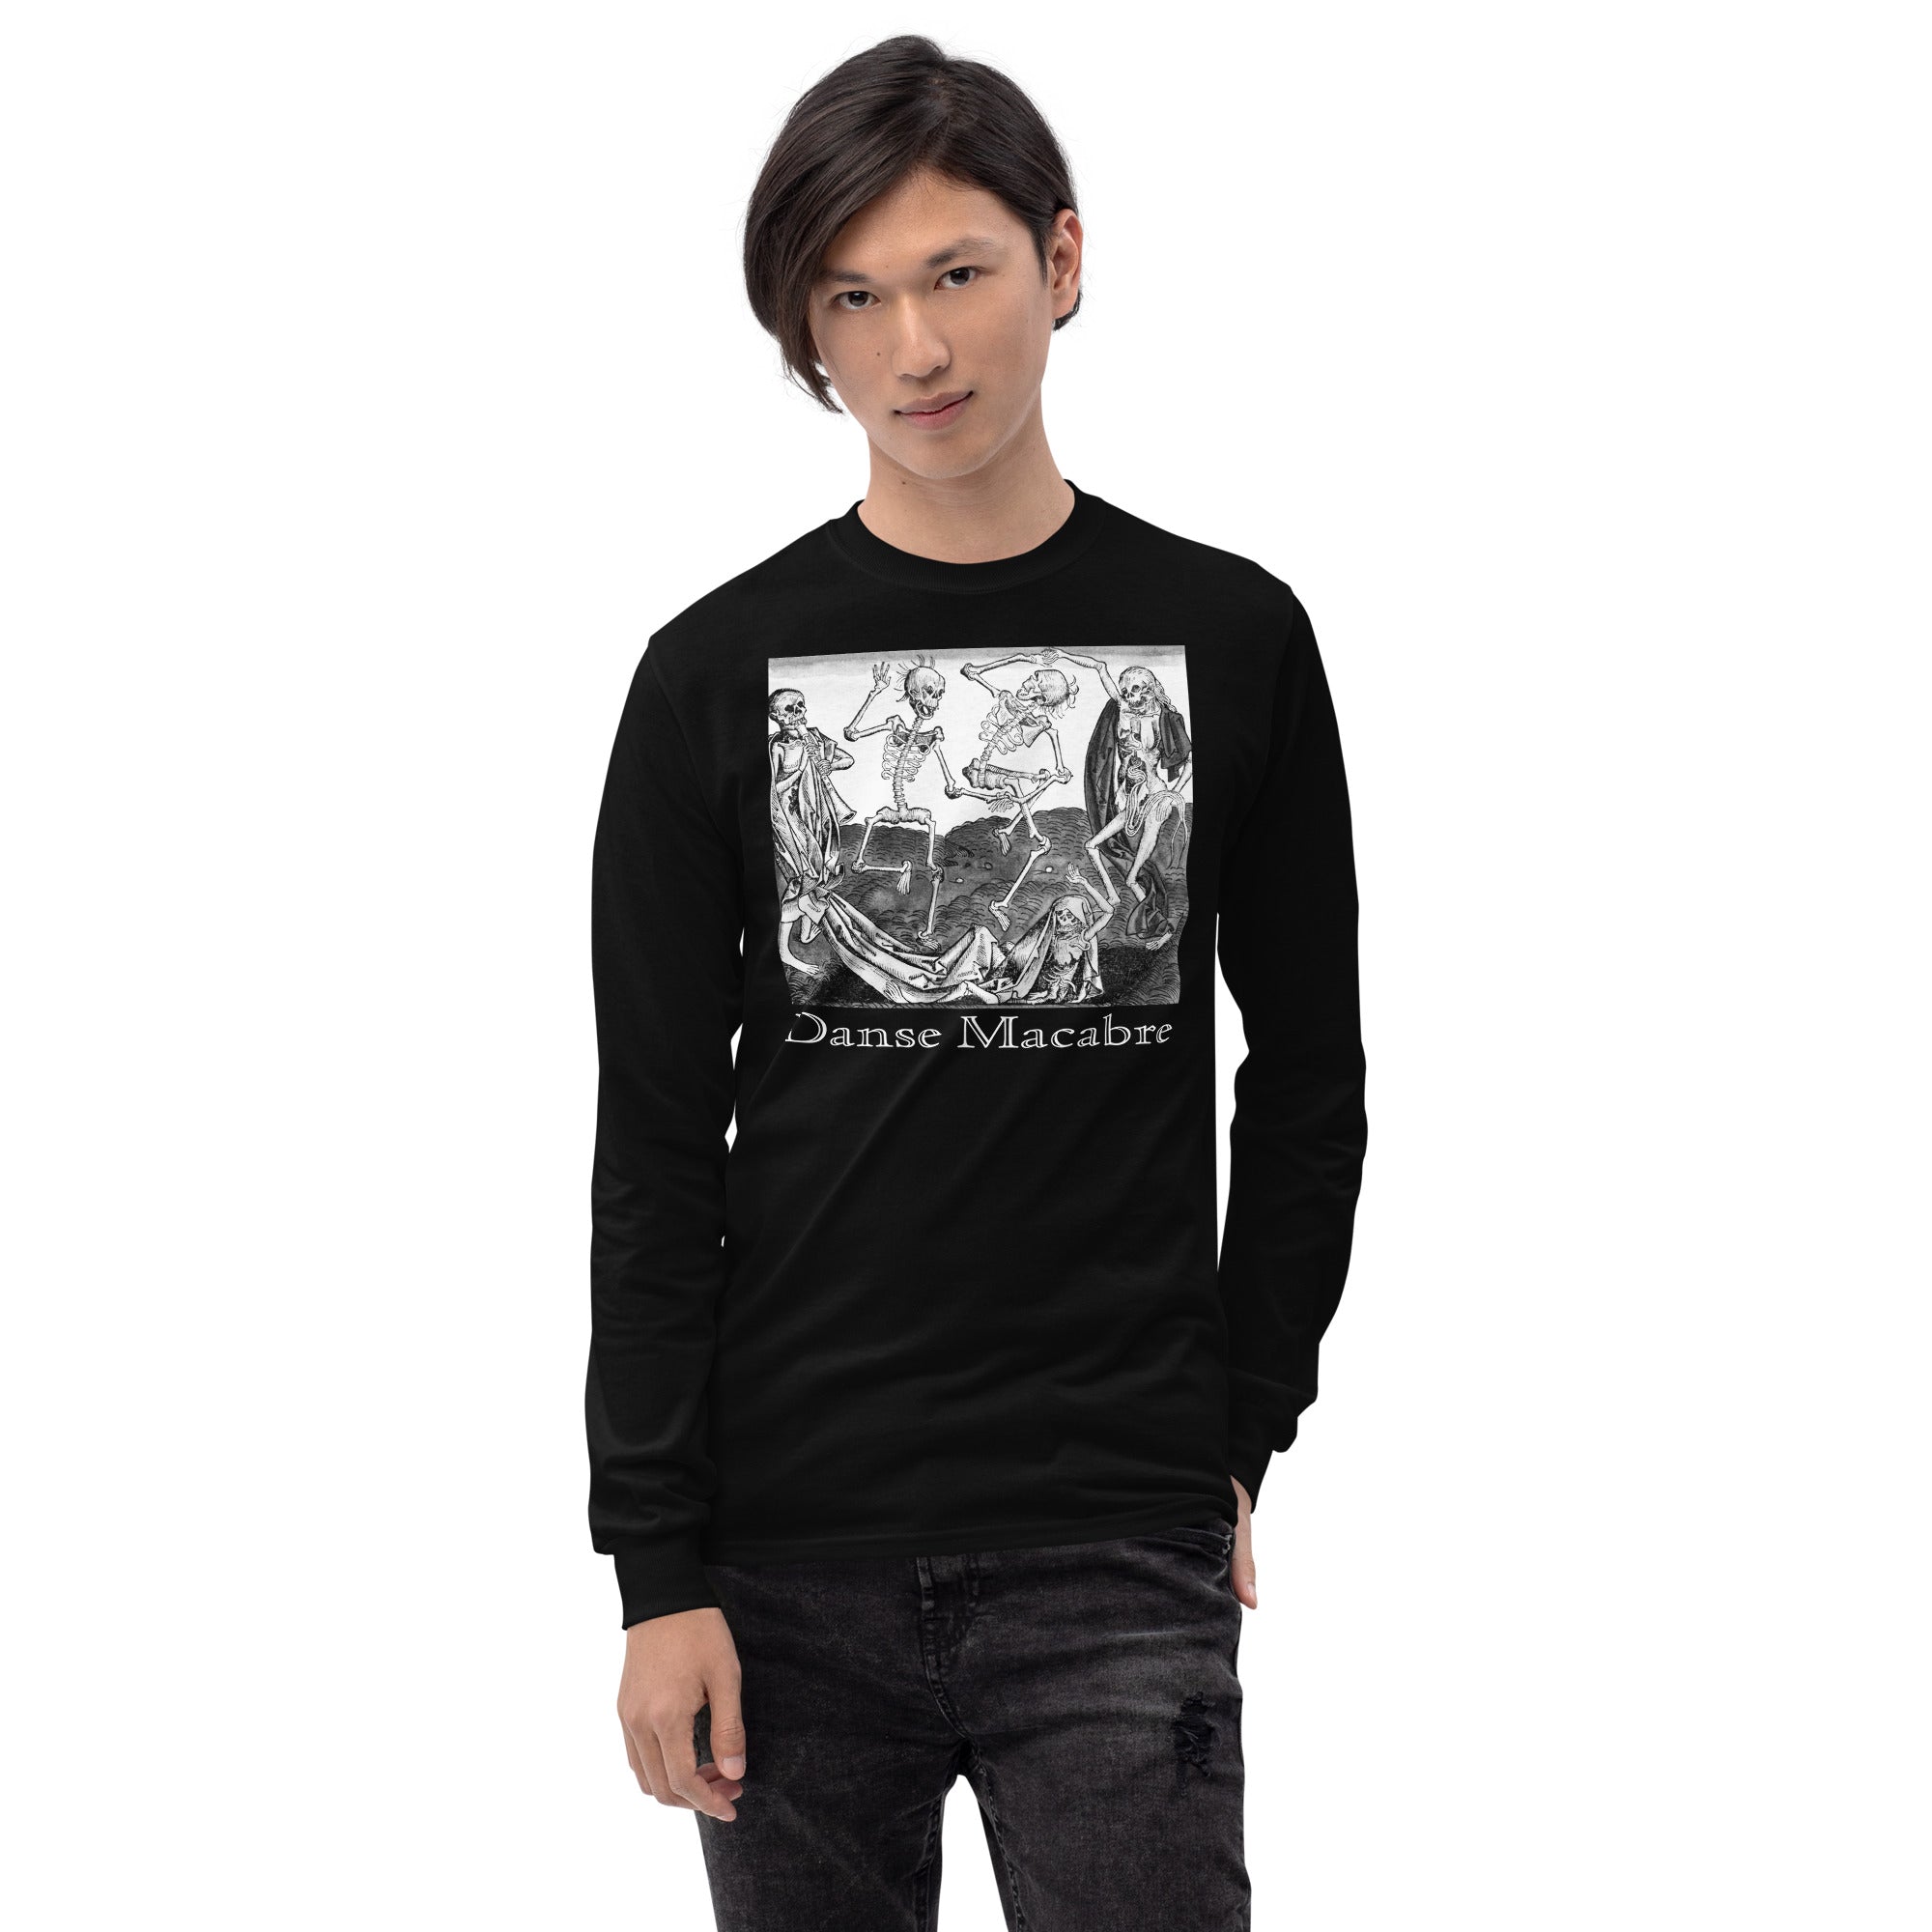 Dance Macabre Skeletons in the Medieval Dance of Death Long Sleeve Shirt - Edge of Life Designs